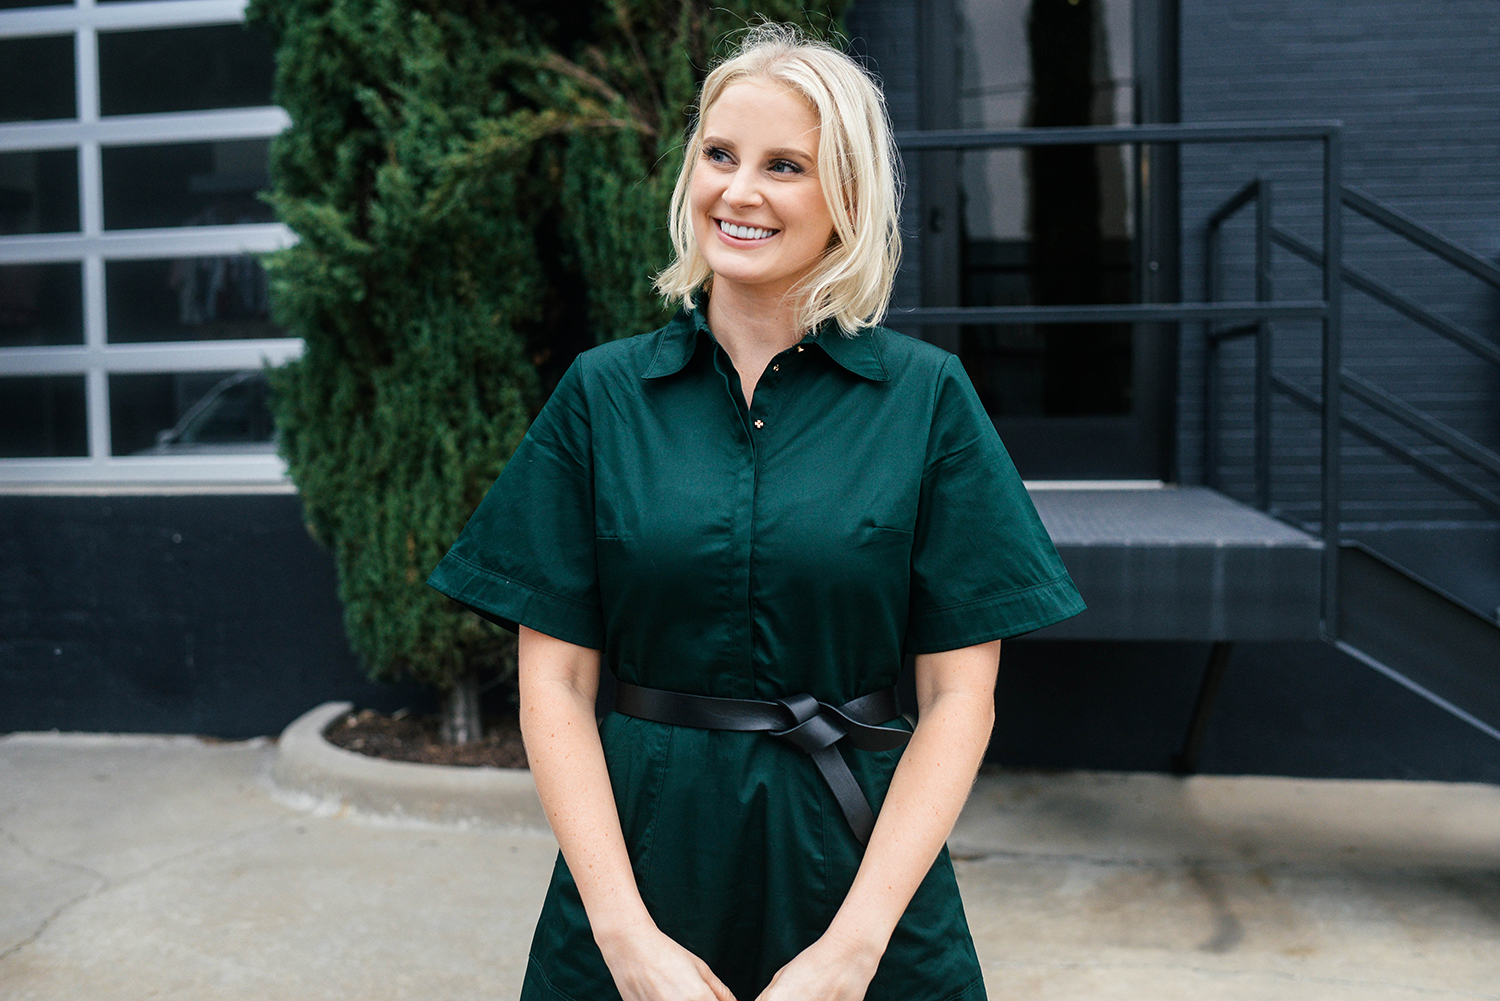 Holiday Church Outfit Ideas | Forest Green Shirtdress